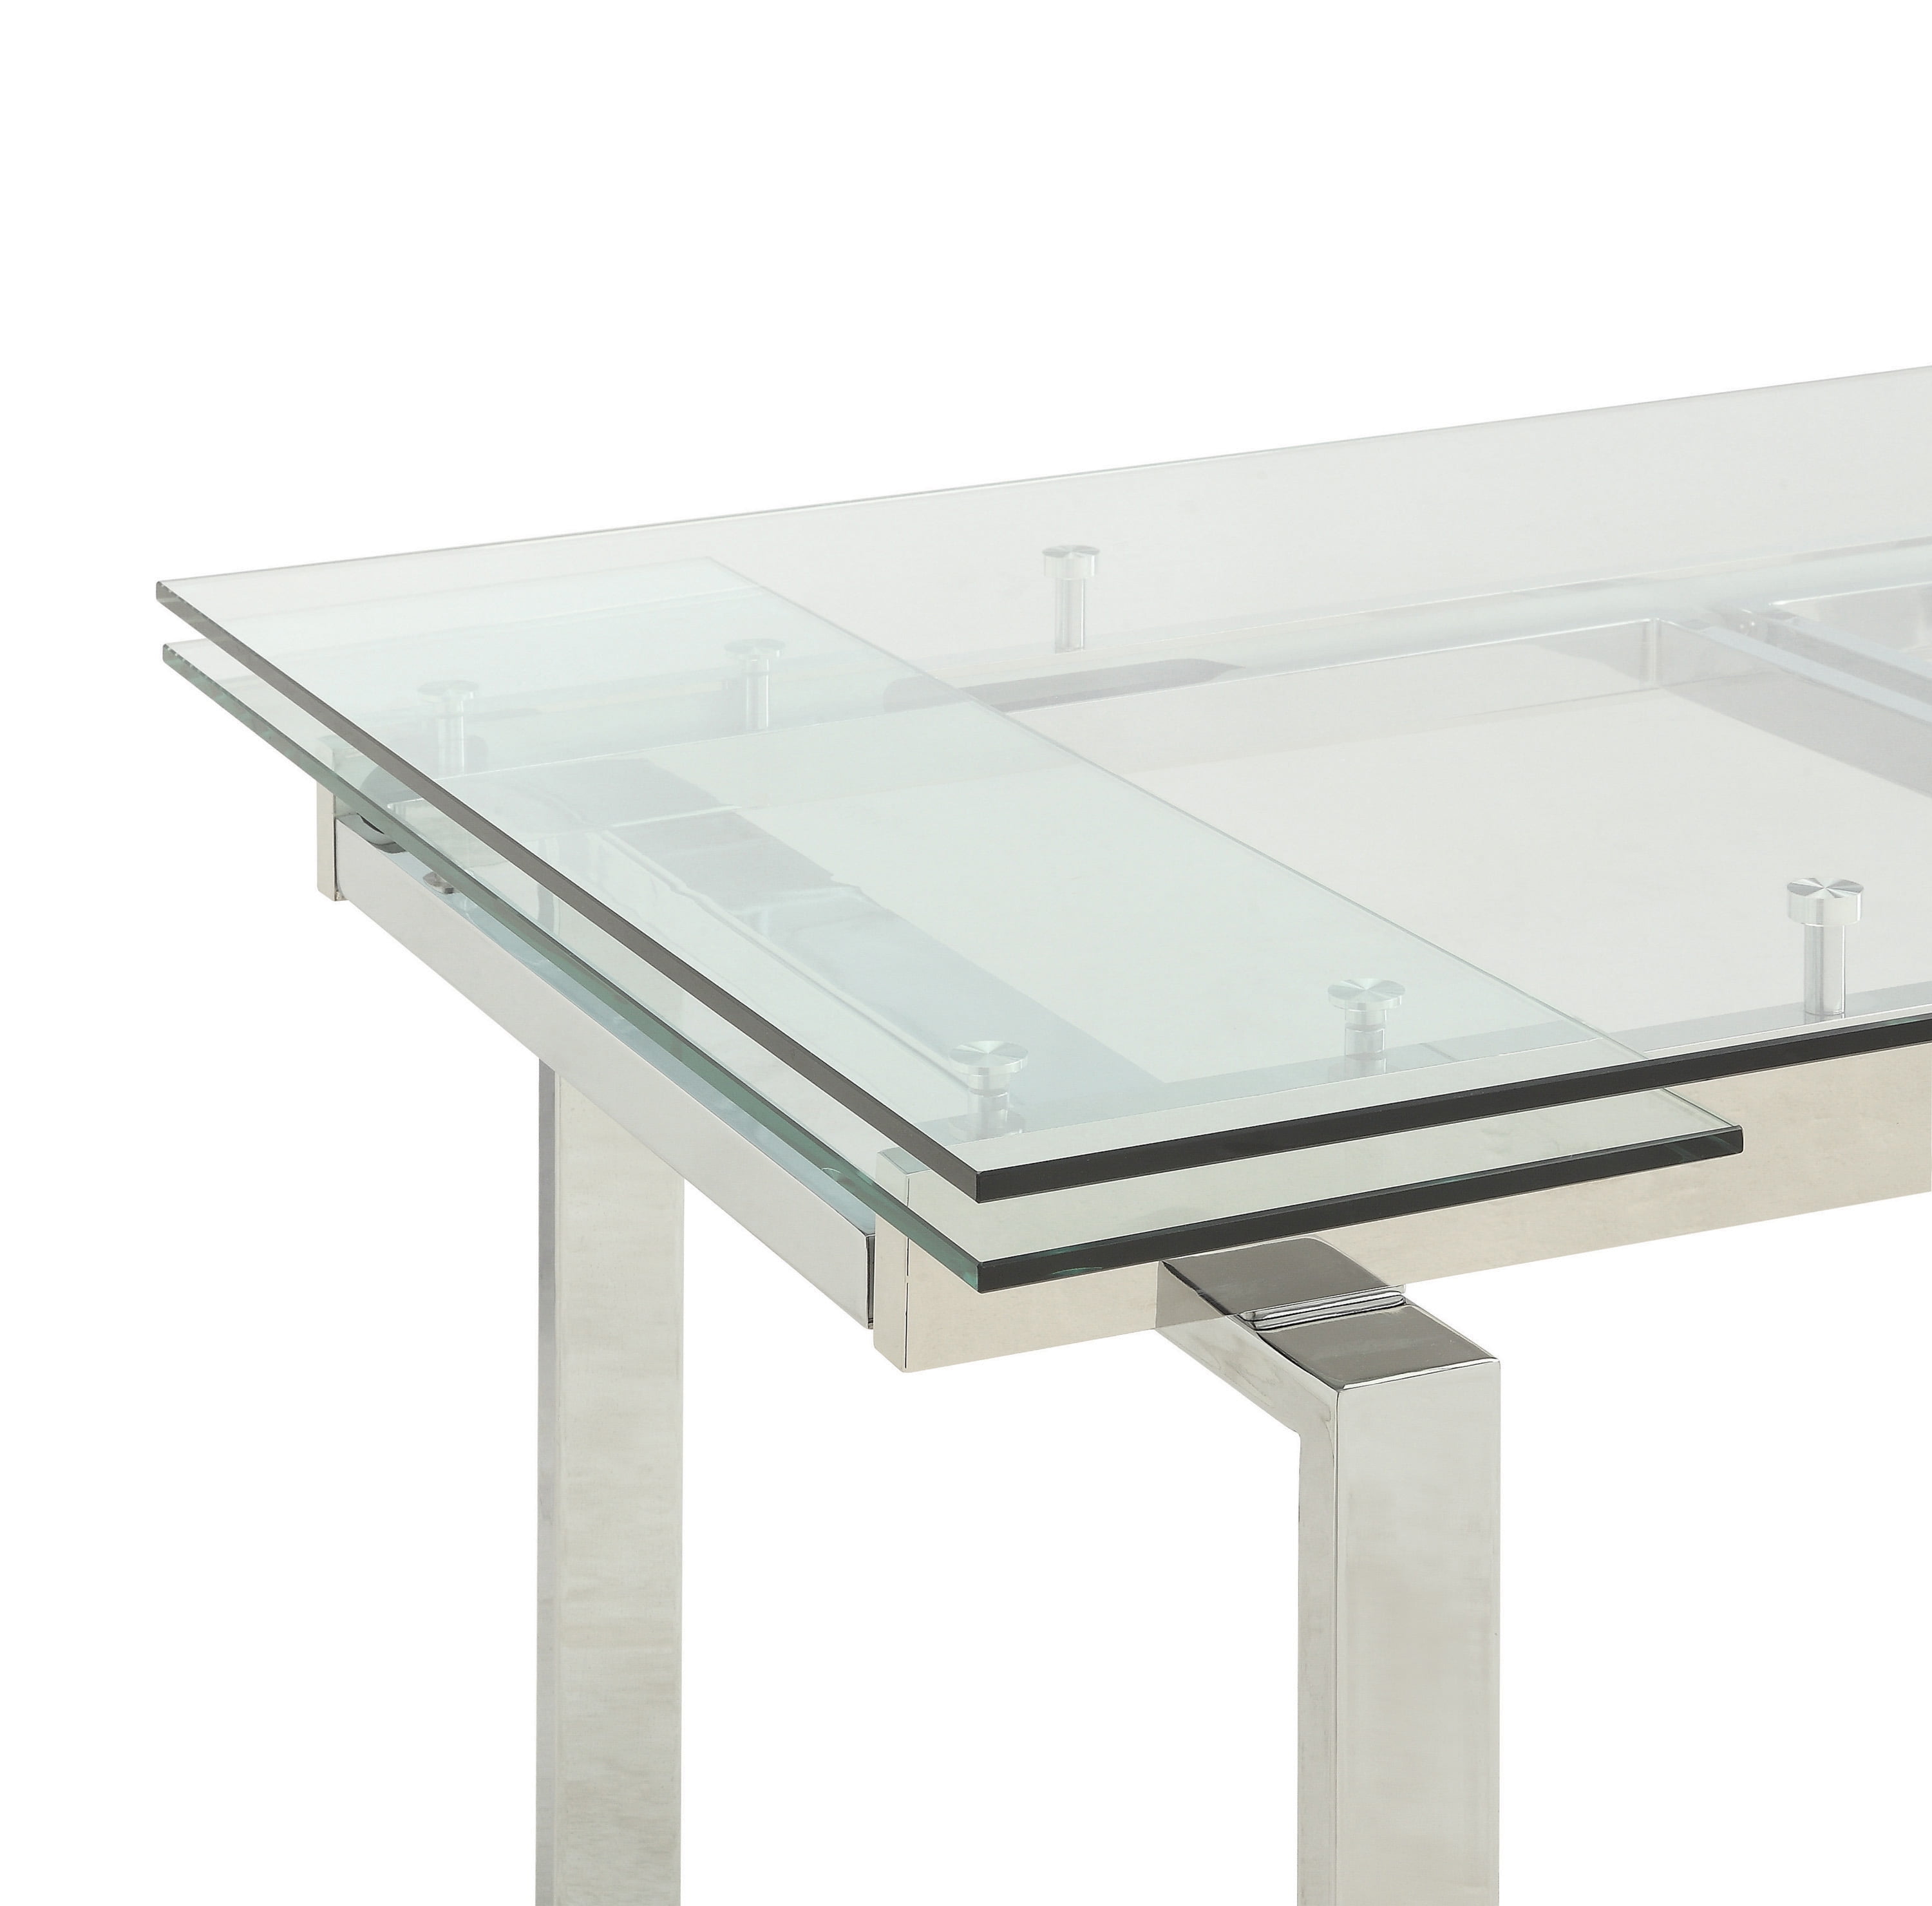 Wexford Glass Top Dining Table With, Contemporary Dining Room Tables With Leaves